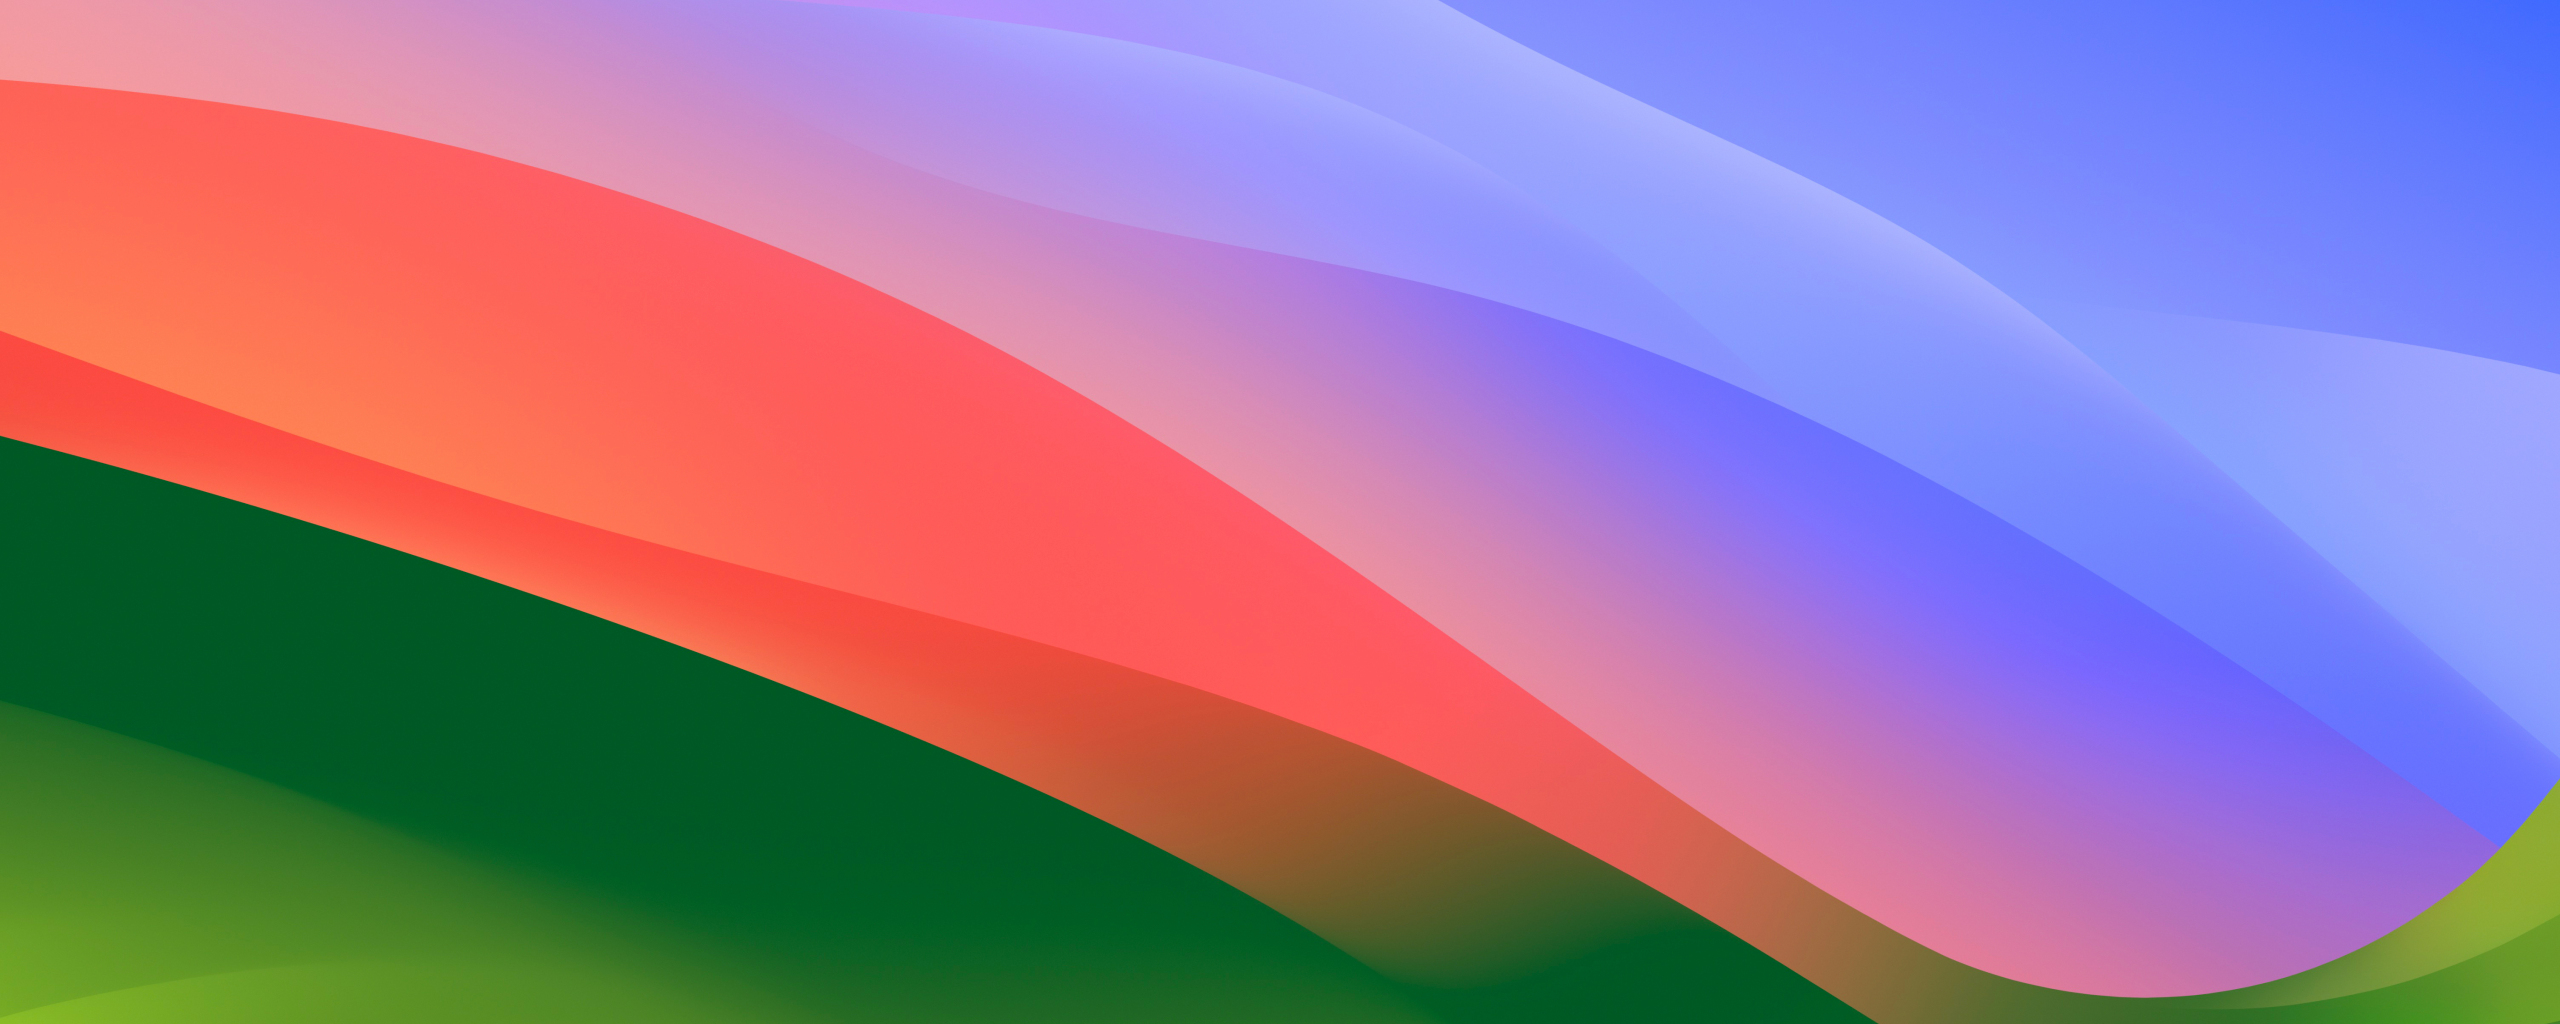 MacOS Sonoma, colorful waves, stock photo, 2560x1024 wallpaper